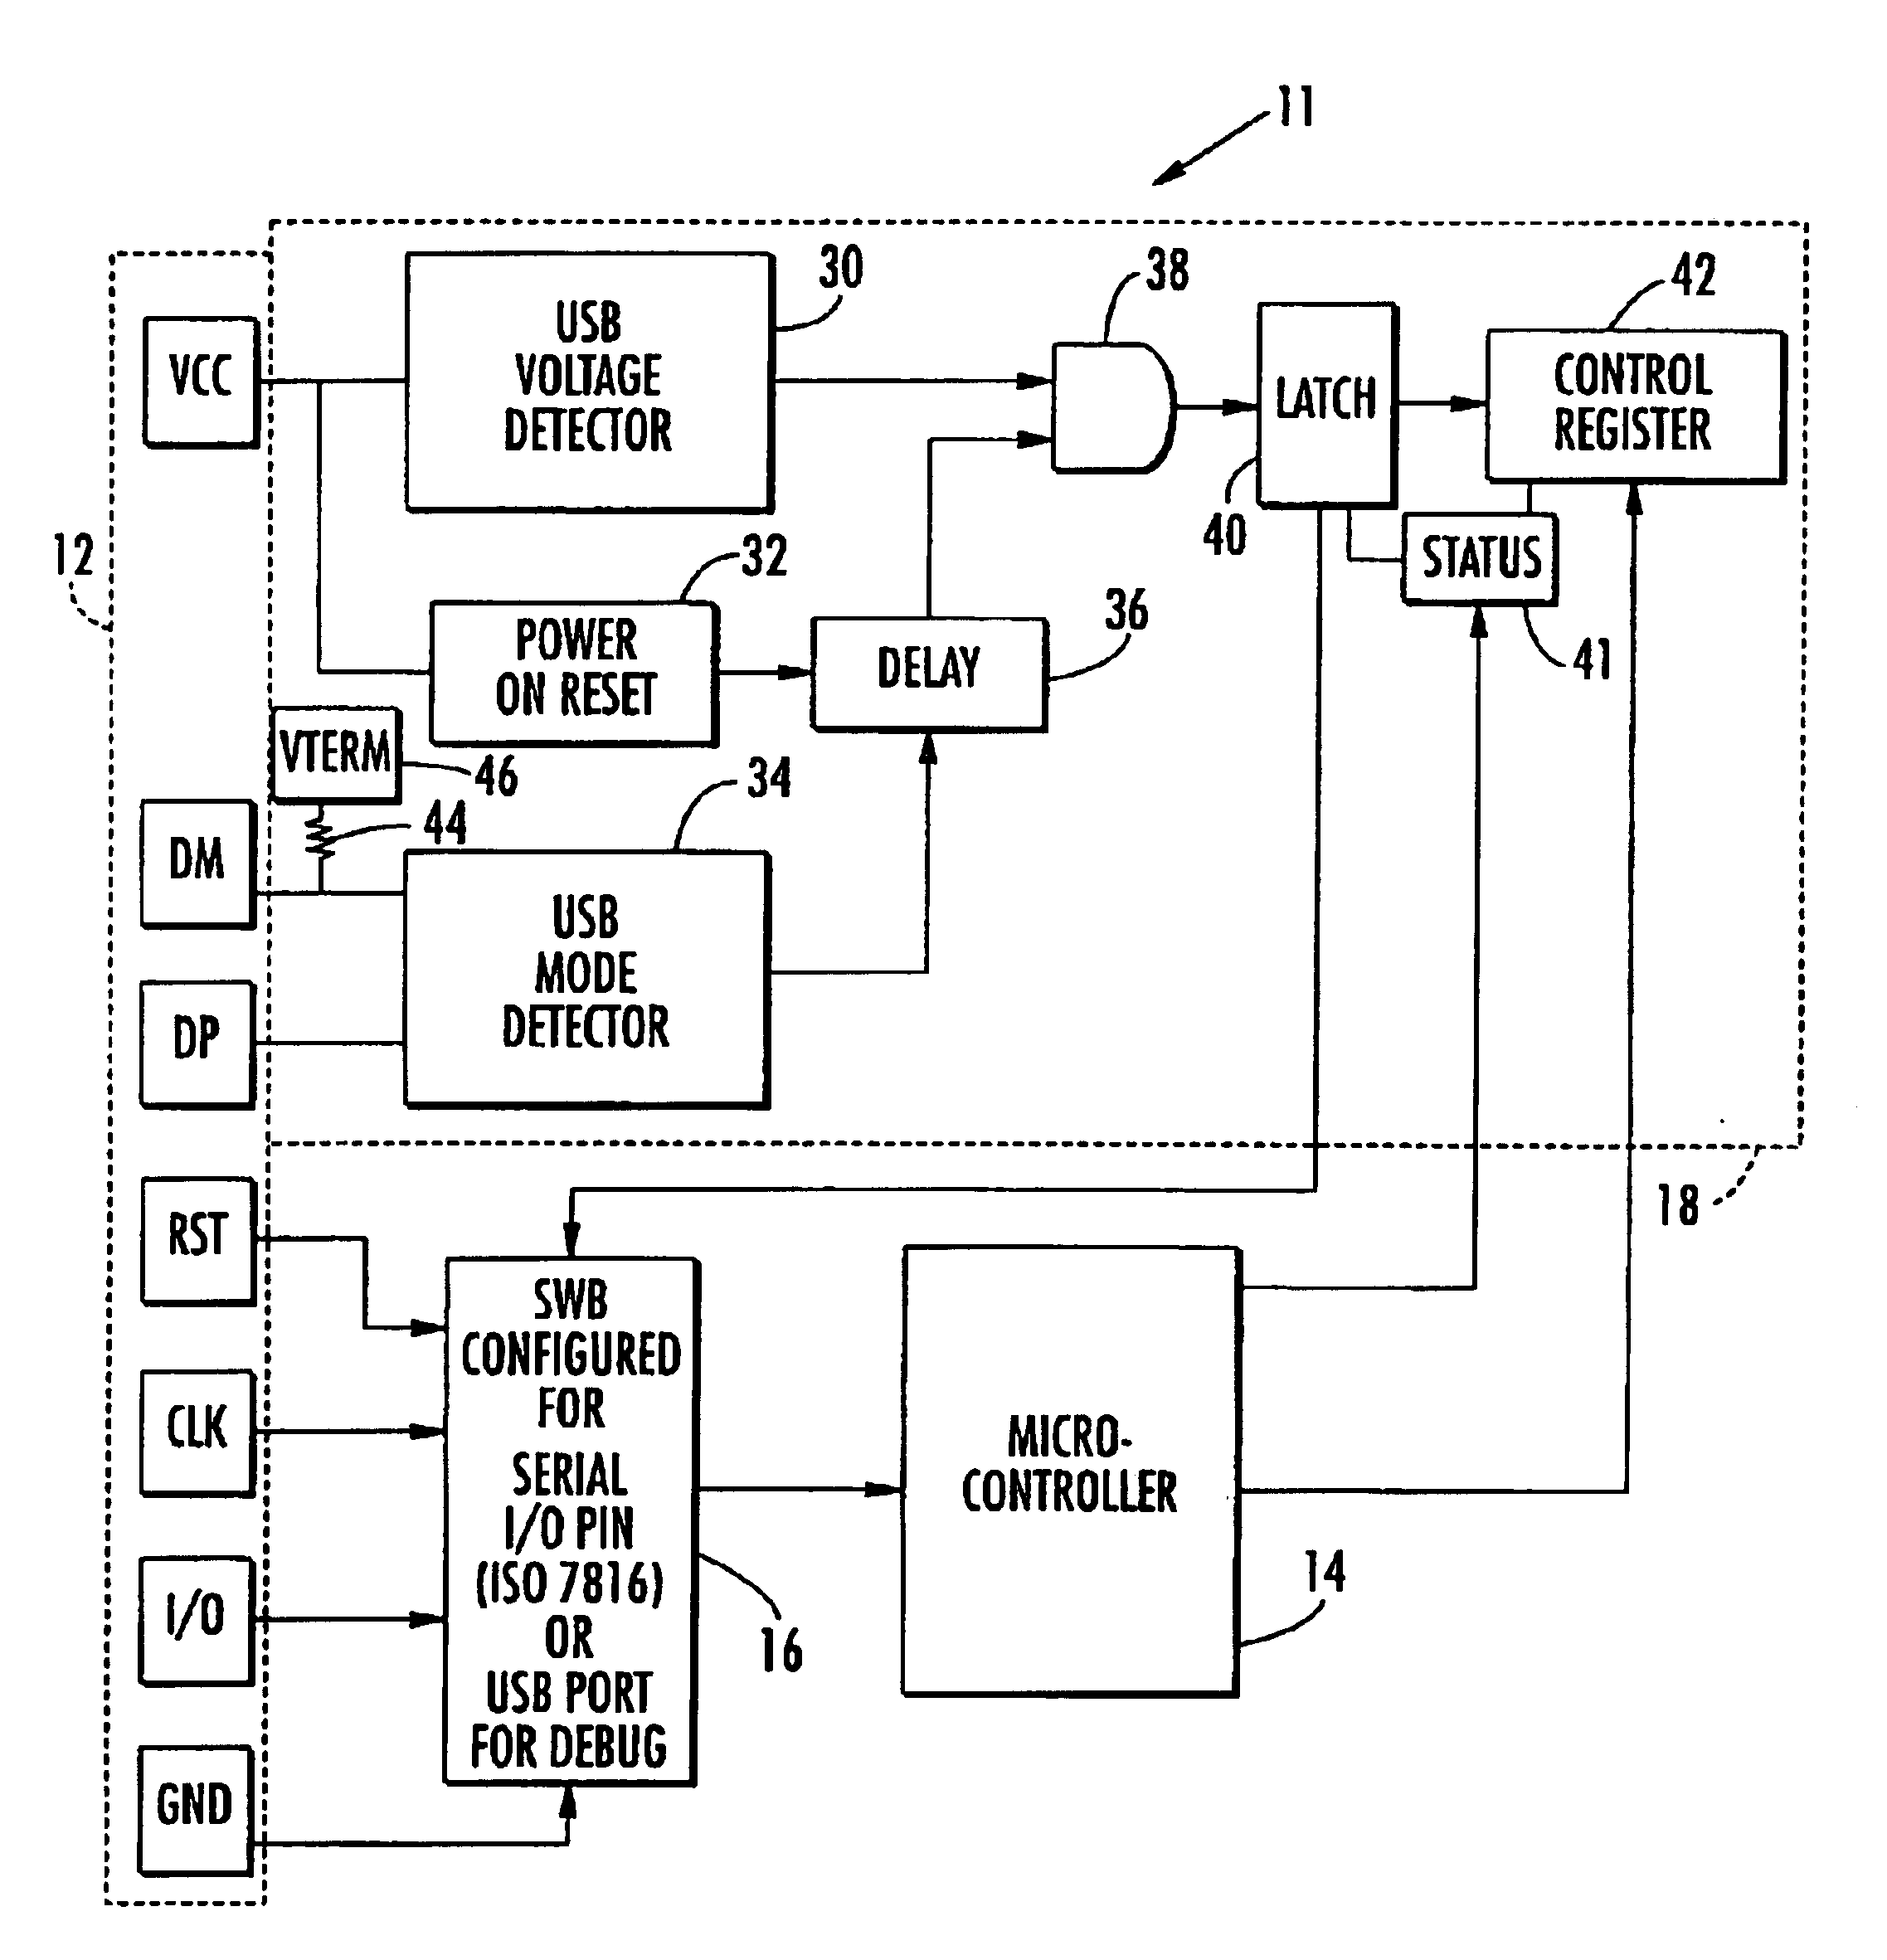 Smart card that can be configured for debugging and software development using secondary communication port